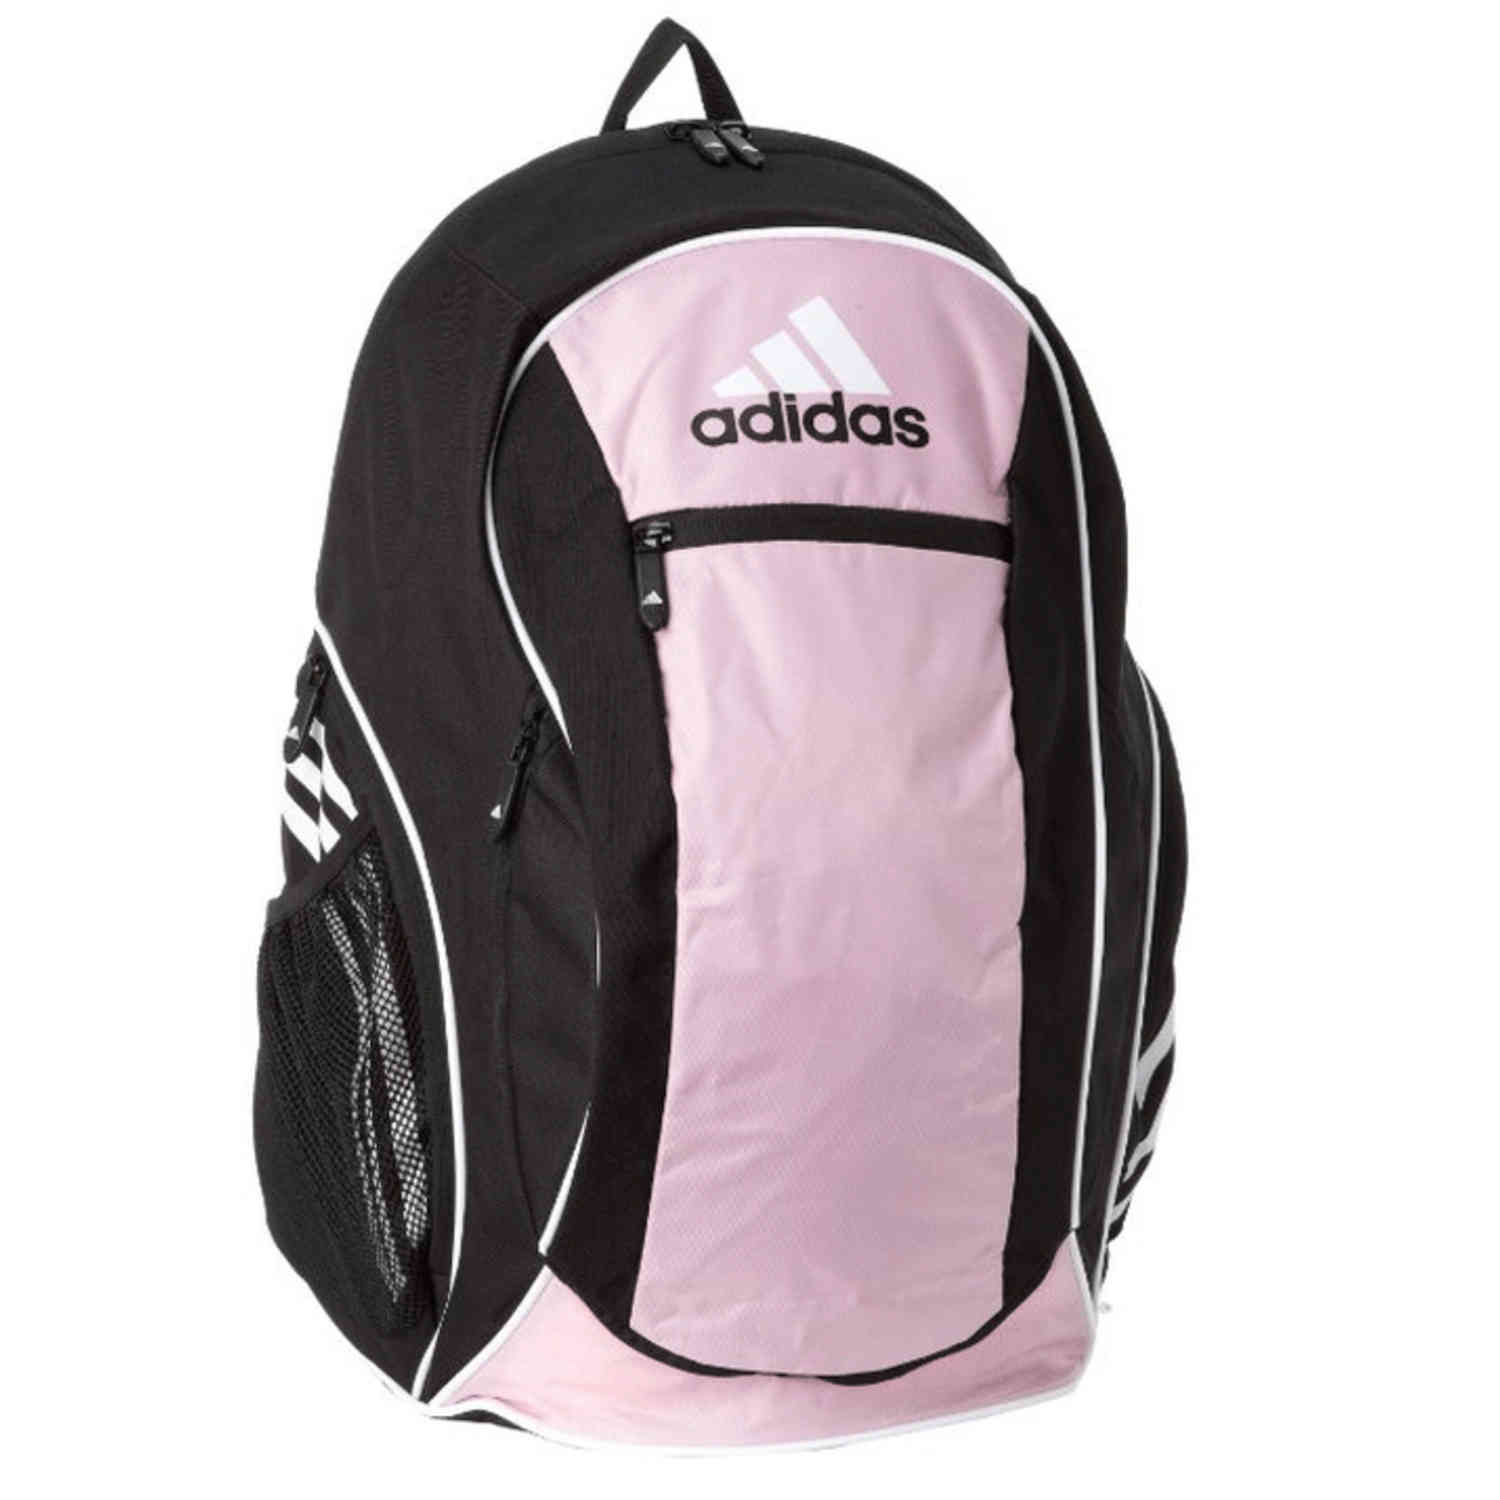 adidas soccer backpack with ball holder